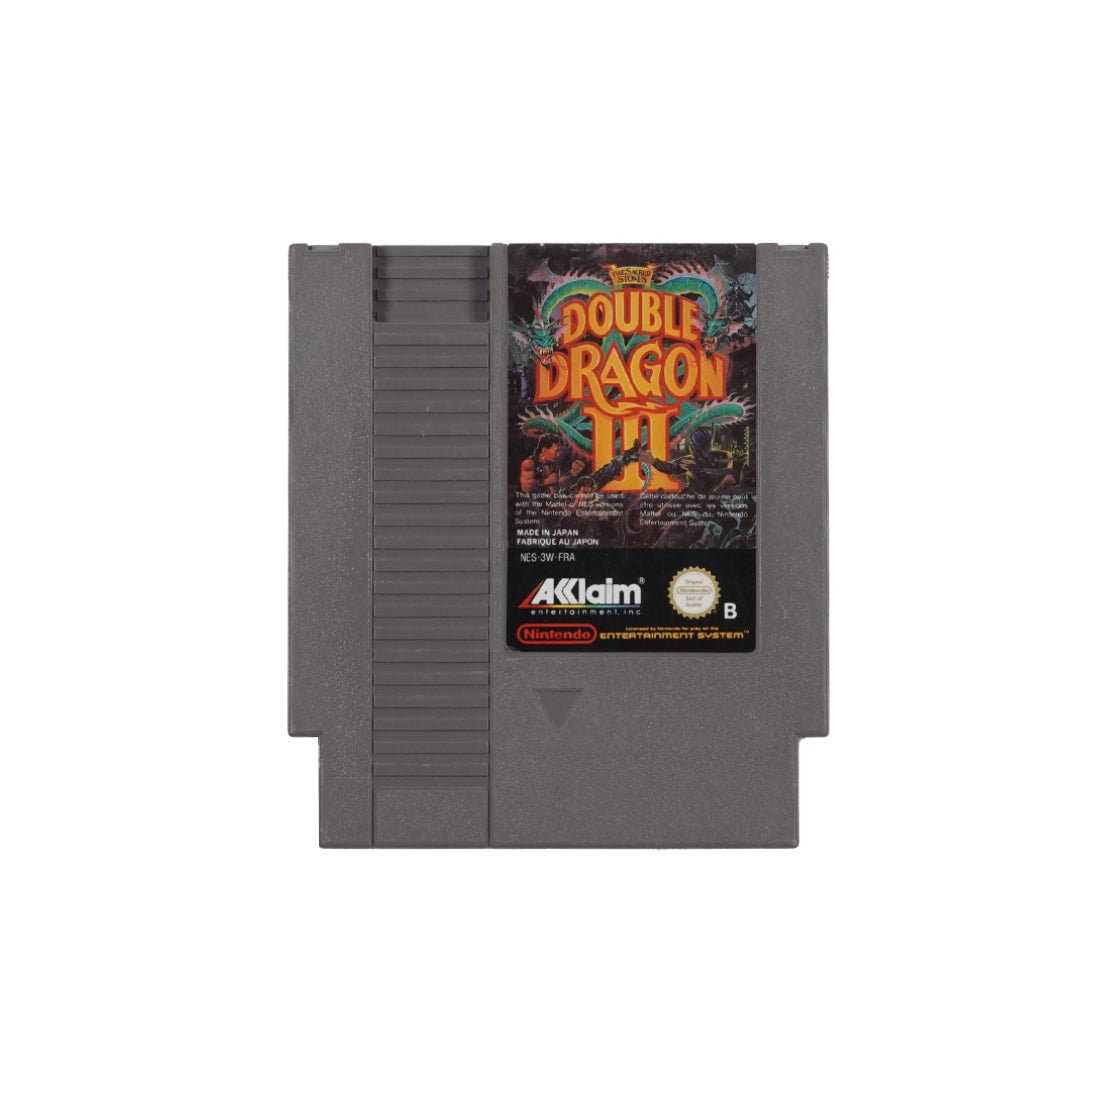 (Pre-Owned) Double Dragon III - Nintendo Entertainment System - ريترو - Store 974 | ستور ٩٧٤